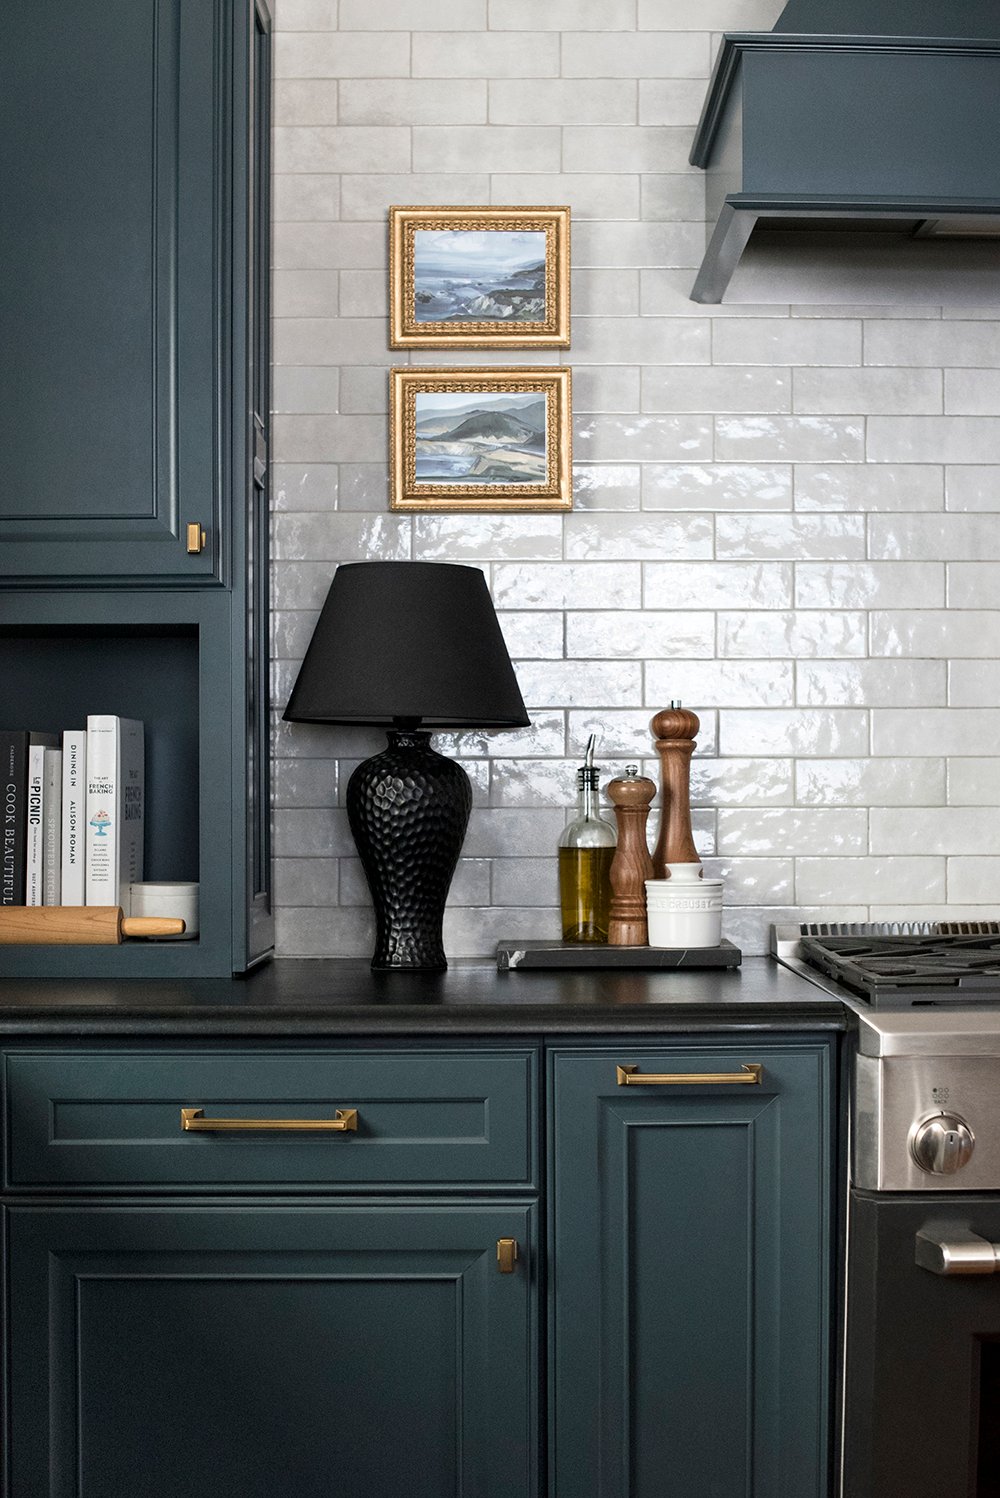 Roundup : Kitchen Countertop Lamps - roomfortuesday.com